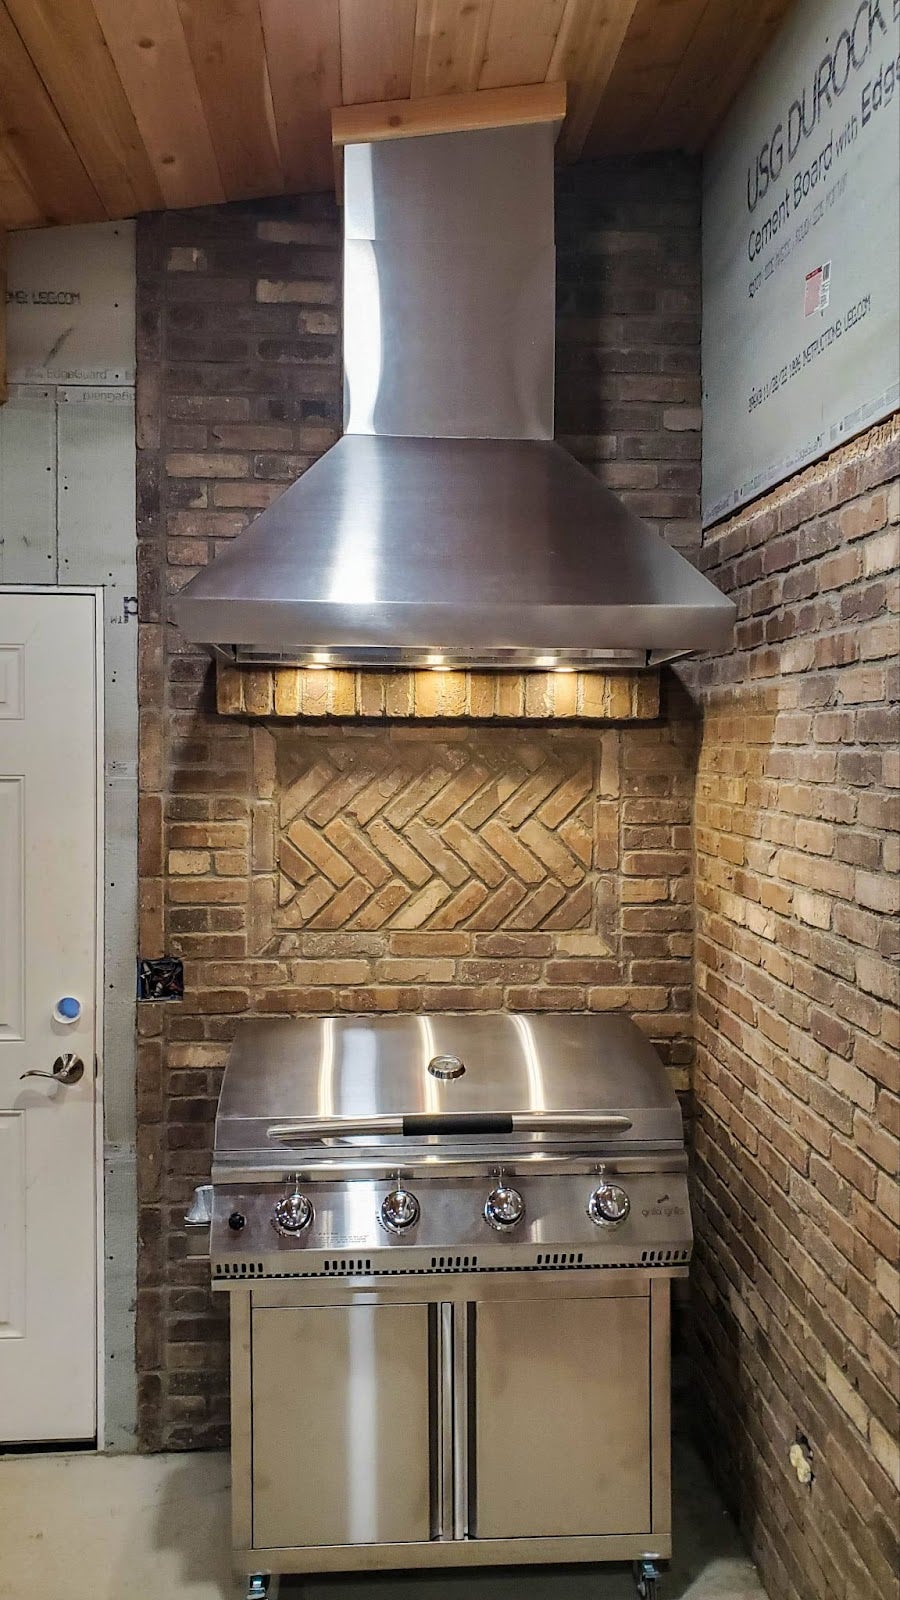 Rustic indoor grilling space highlighted by a stainless steel Proline range hood against a brick wall, merging industrial style with homely warmth - prolinerangehoods.com.